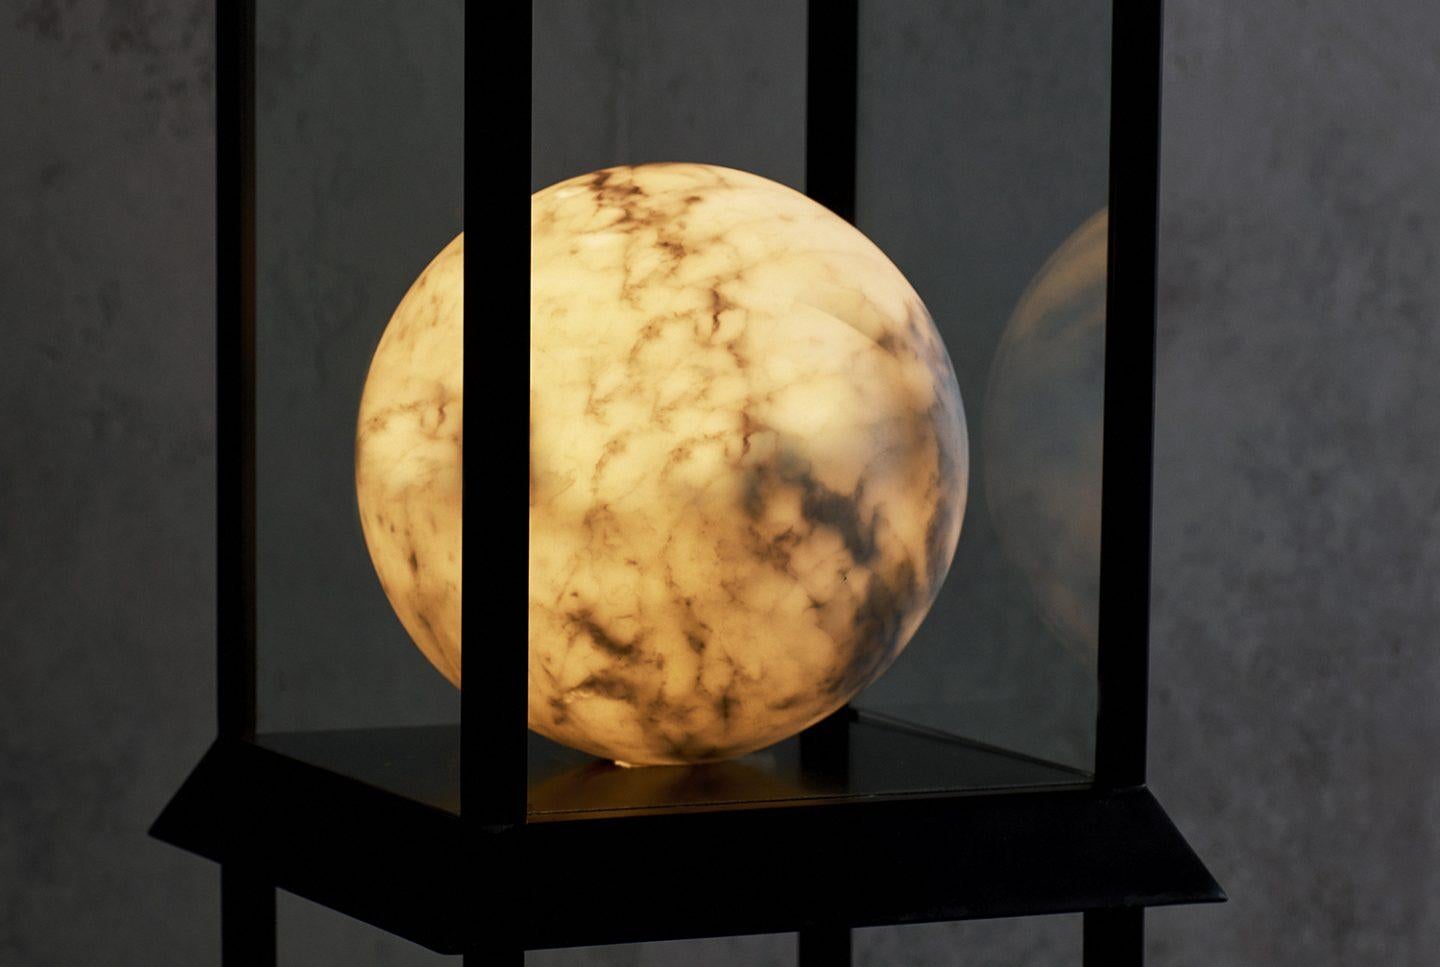 Each of the three glass vitrine cabinets contains a hollow marble sphere. Each sphere has been meticulously carved out from a opening only 1.5” wide. This is an extremely delicate process that takes months to perform. This exacting process allows